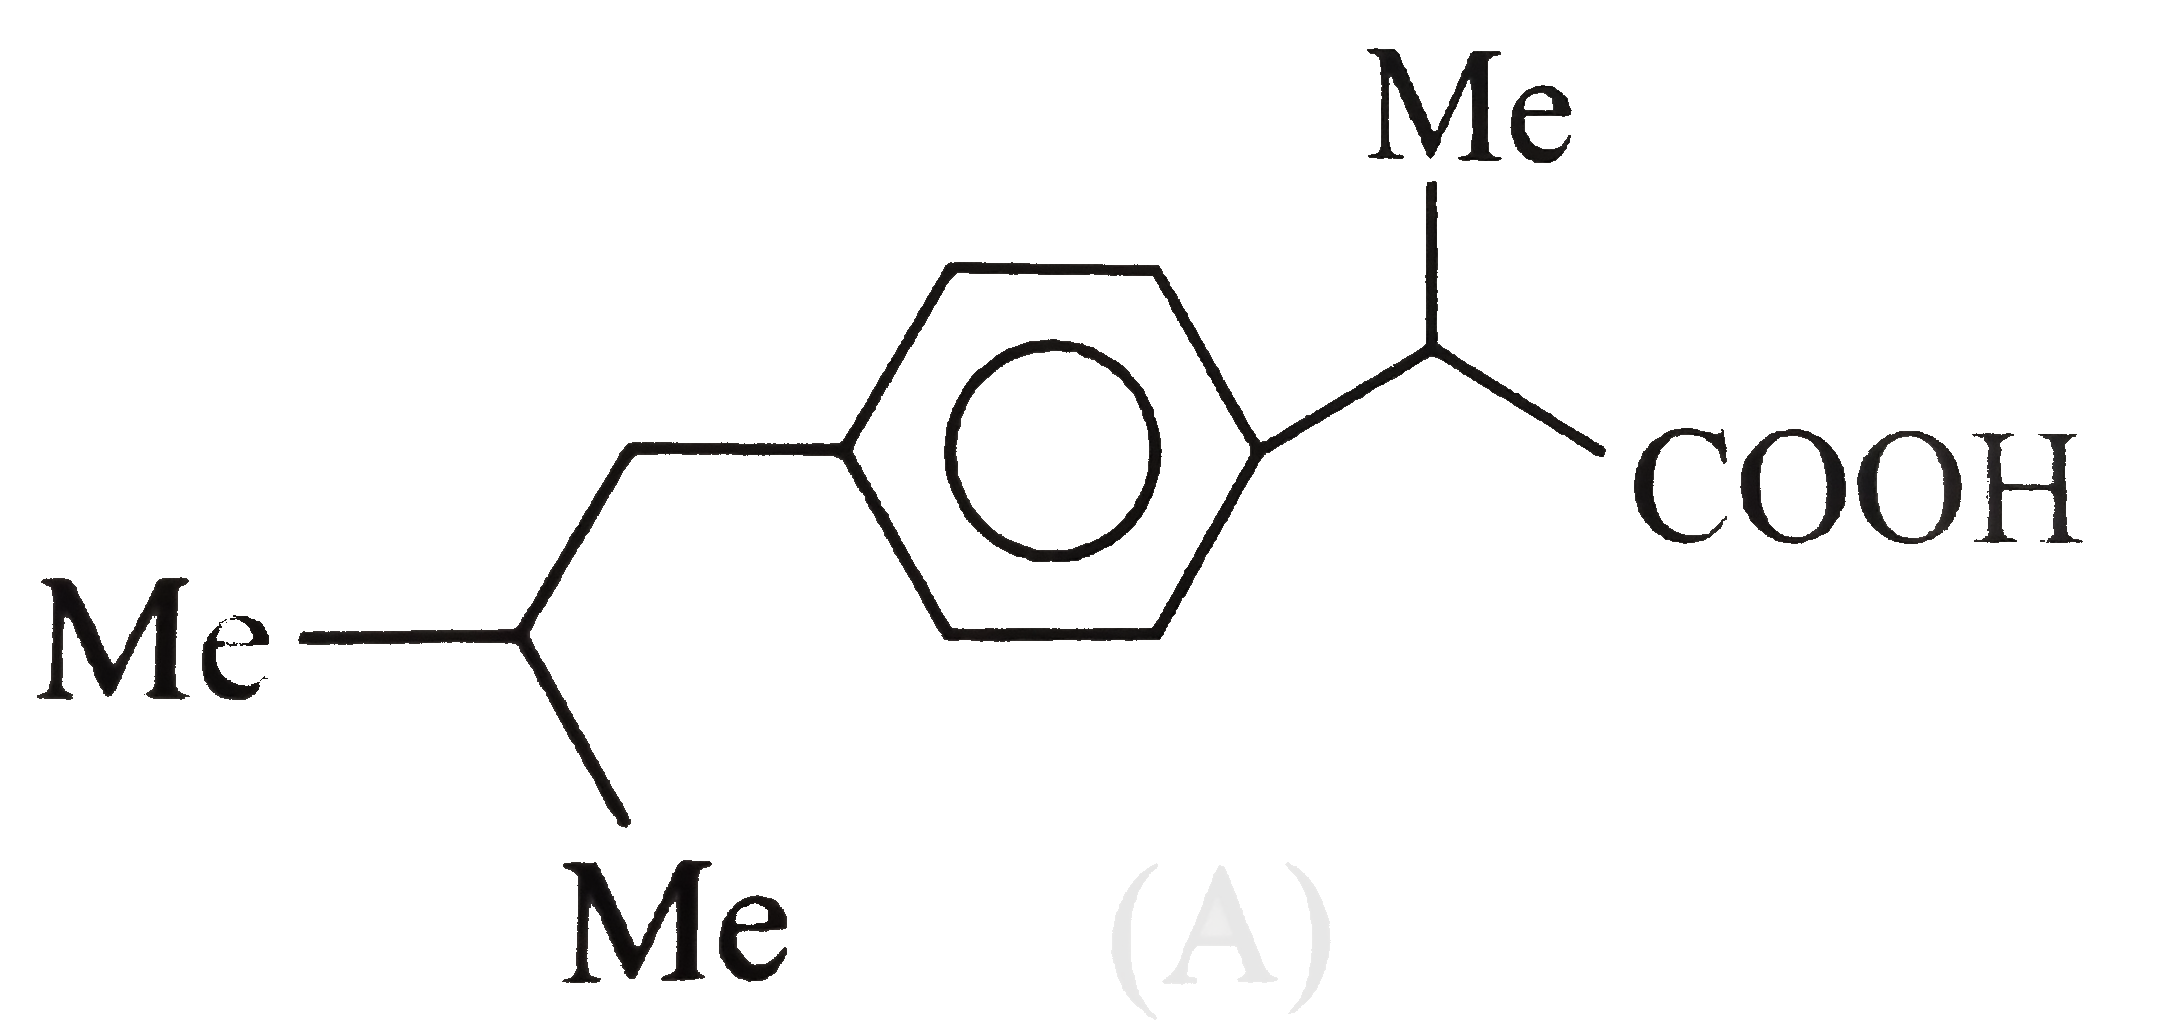 The analgesic drug ibuprofen (A) is chiral and exists in (+) and (-) froms. One enantiomer is physiologically active, while the other is inactive.The structure of ibuprofen is given below.      The IUPAC name of (A) is: